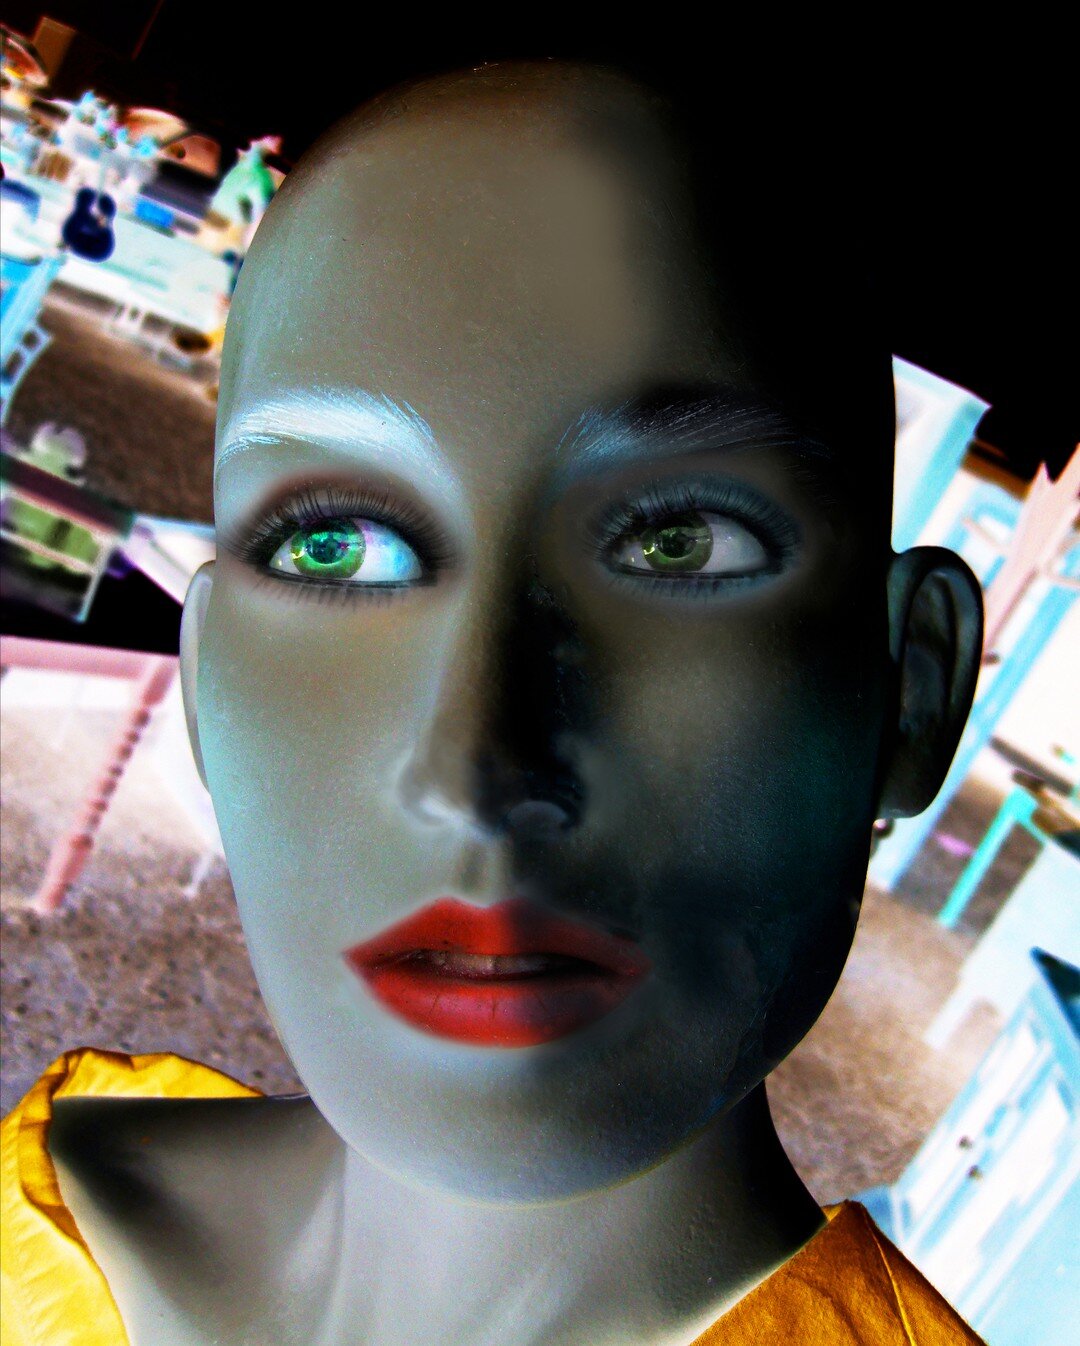 justisgary

𝙇𝙪𝙘𝙚 (recent version, full image)
digital photo of mannequin
archival pigment print on metal
24 x 19 inches
&copy; Gary Justis 2021